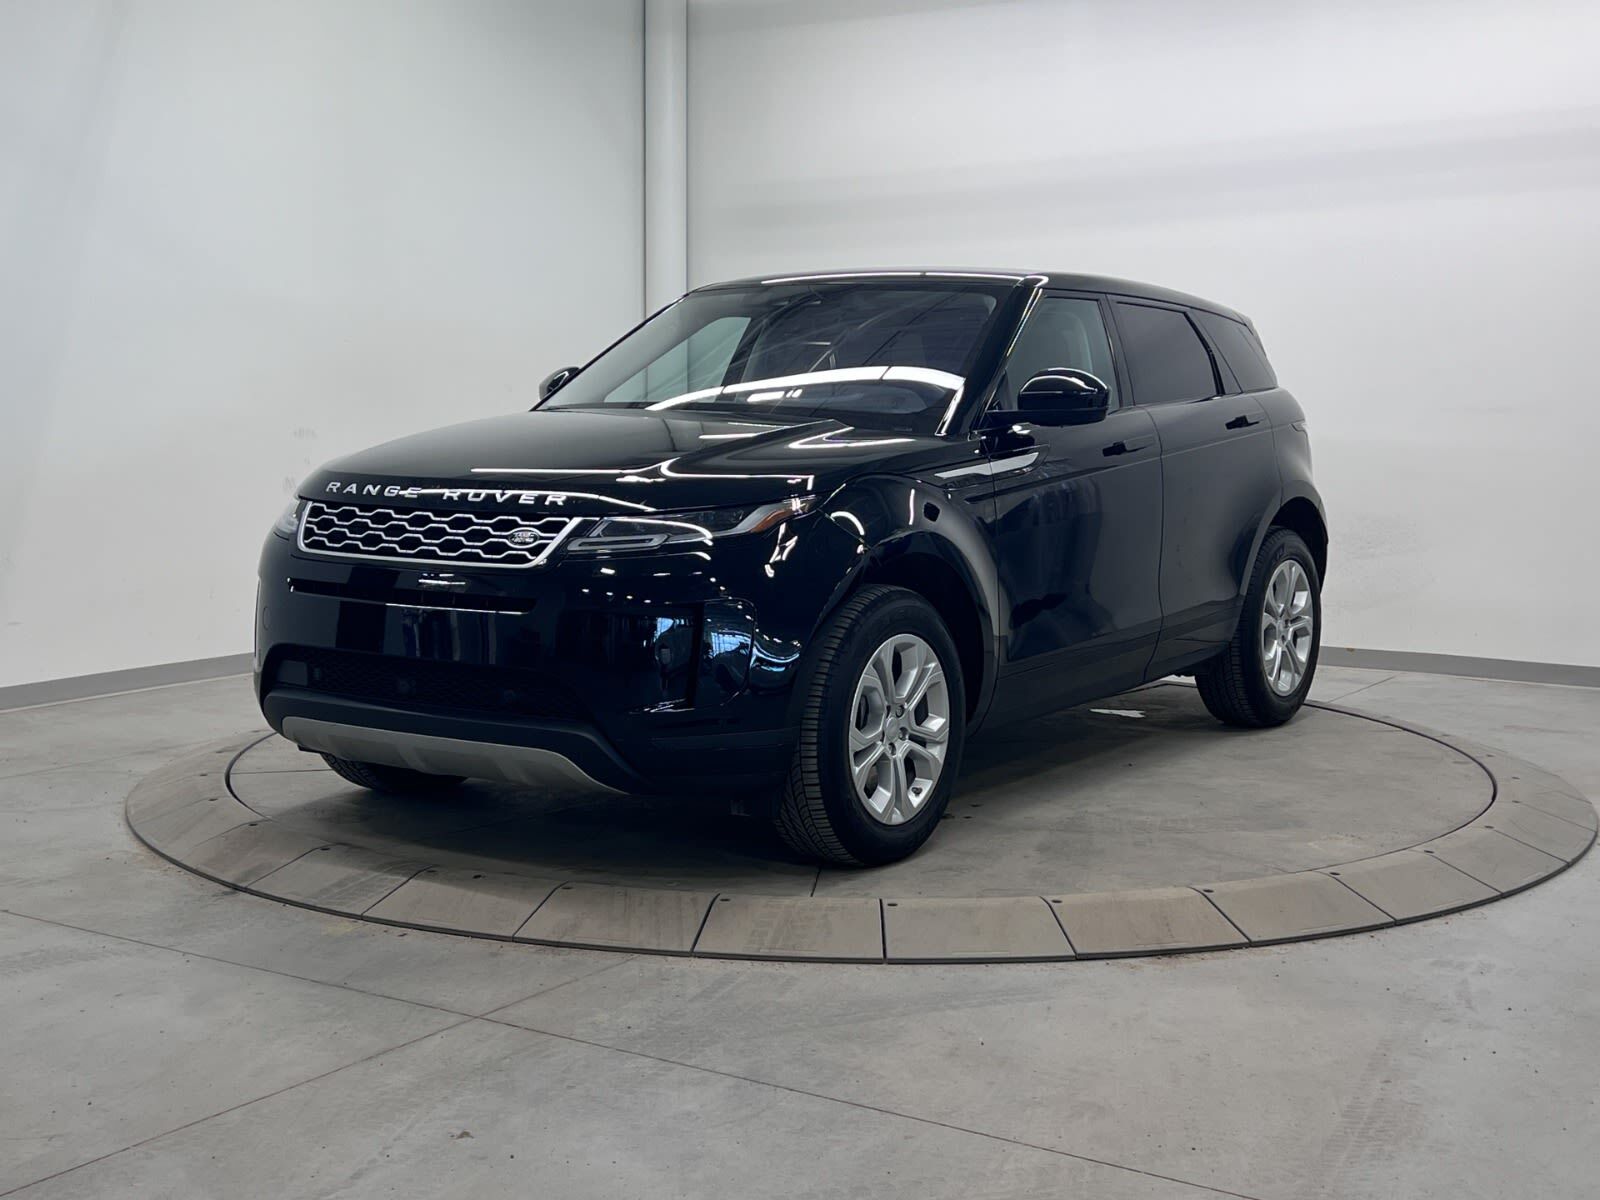 2020 Land Rover Range Rover Evoque CERTIFIED PRE OWNED RATES AS LOW AS 3.99%